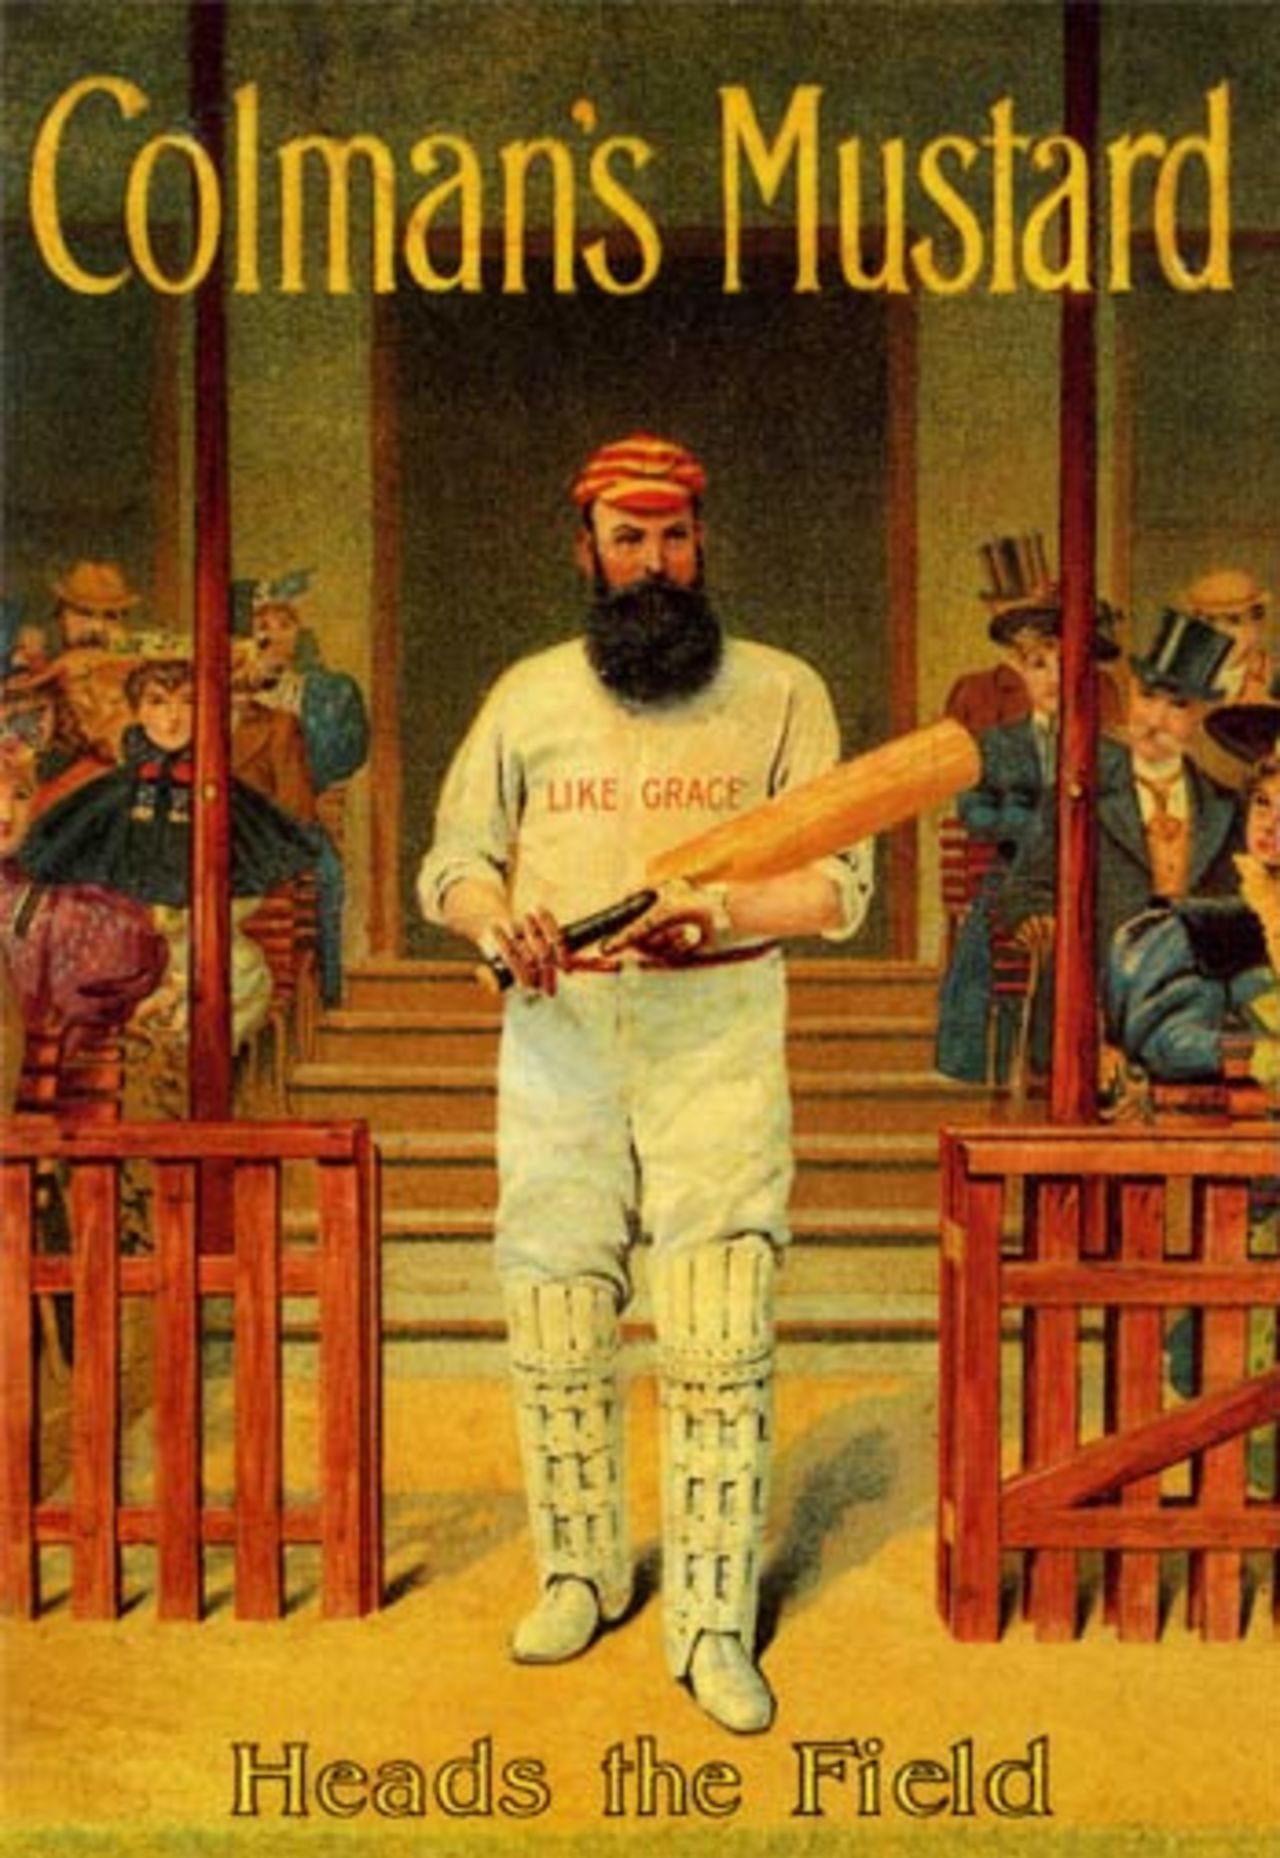 Early commercialism: WG Grace advertises Coleman's Mustard around 1895